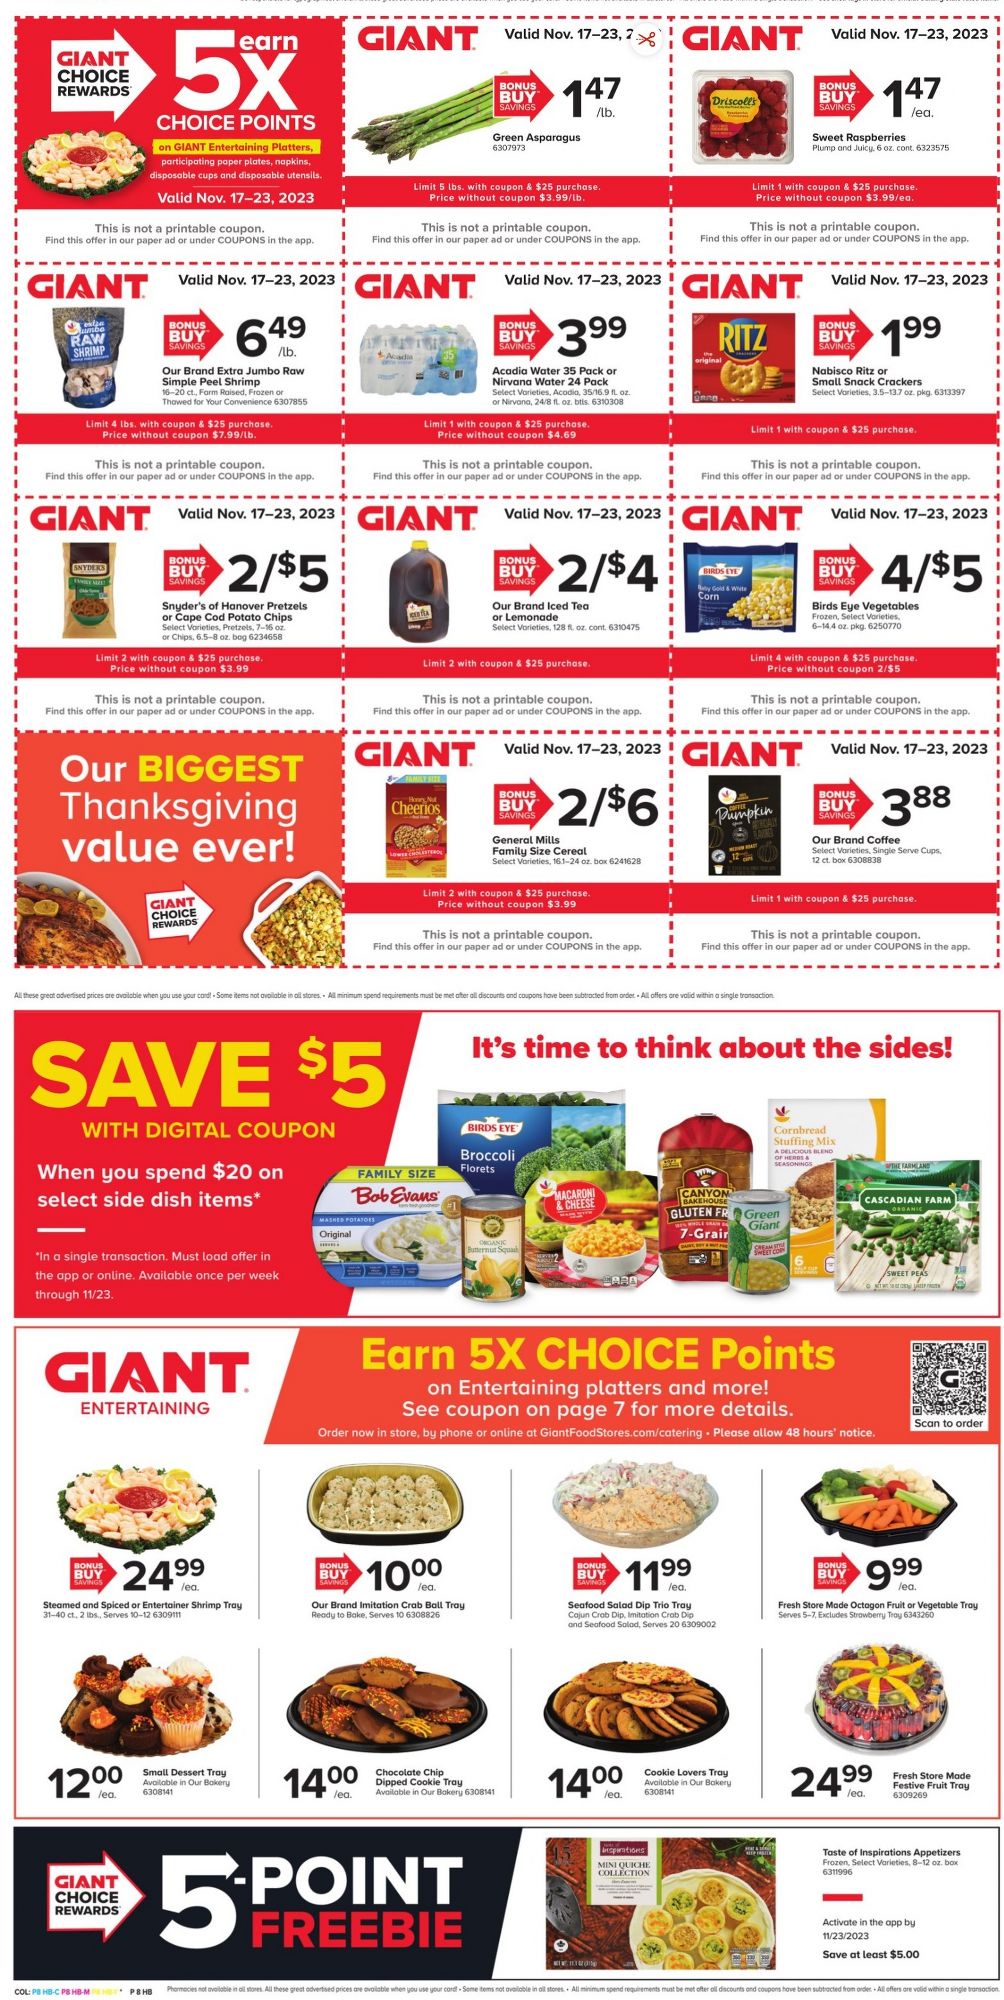 Giant Black Friday July 2024 Weekly Sales, Deals, Discounts and Digital Coupons.